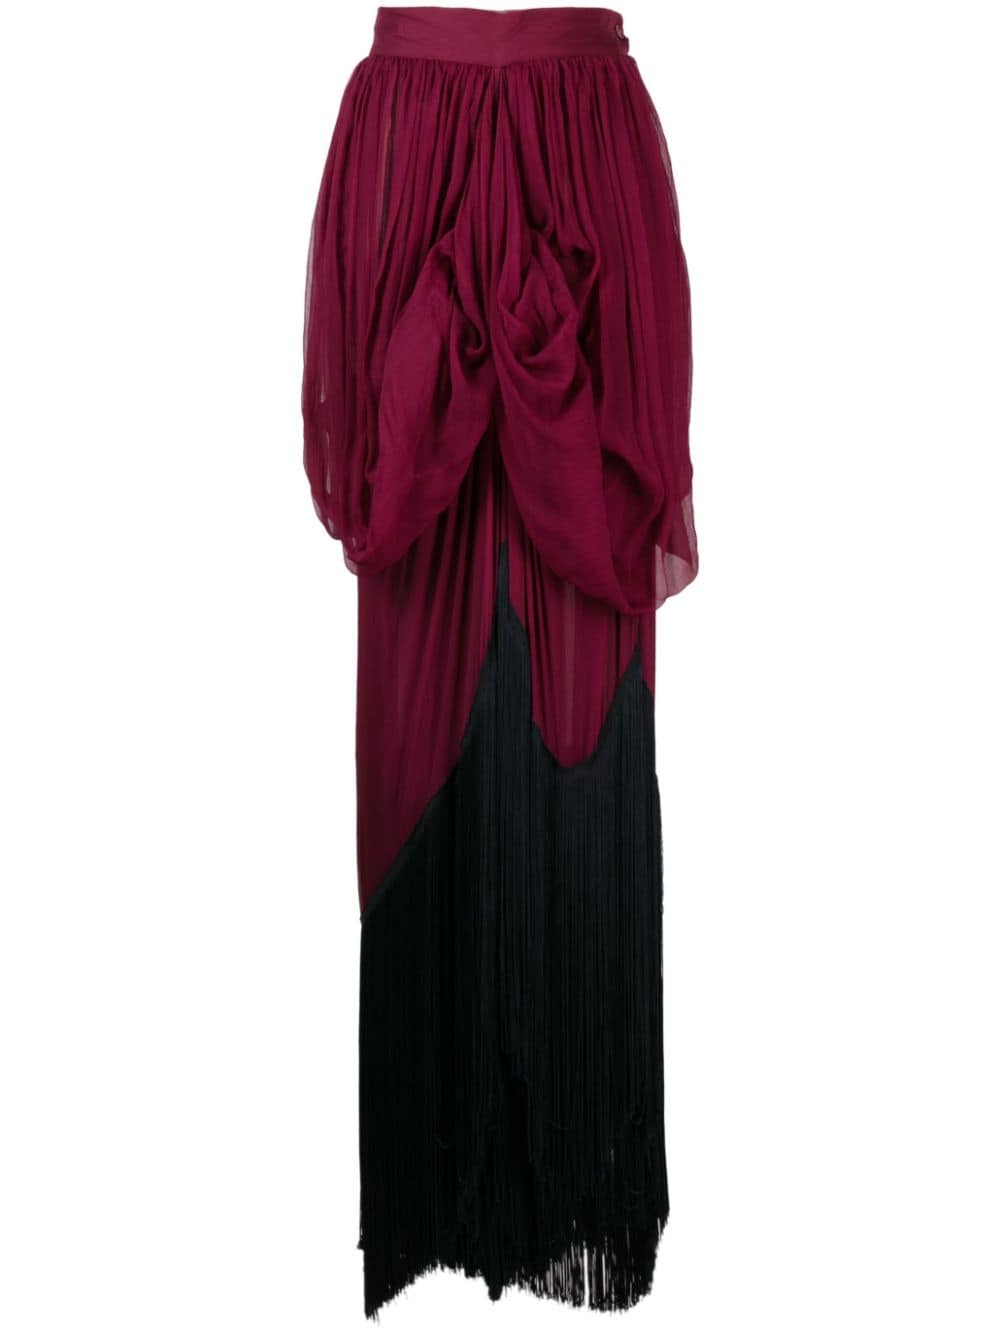 Dolce & Gabbana Pre-Owned 2000s draped fringed maxi silk skirt - Red